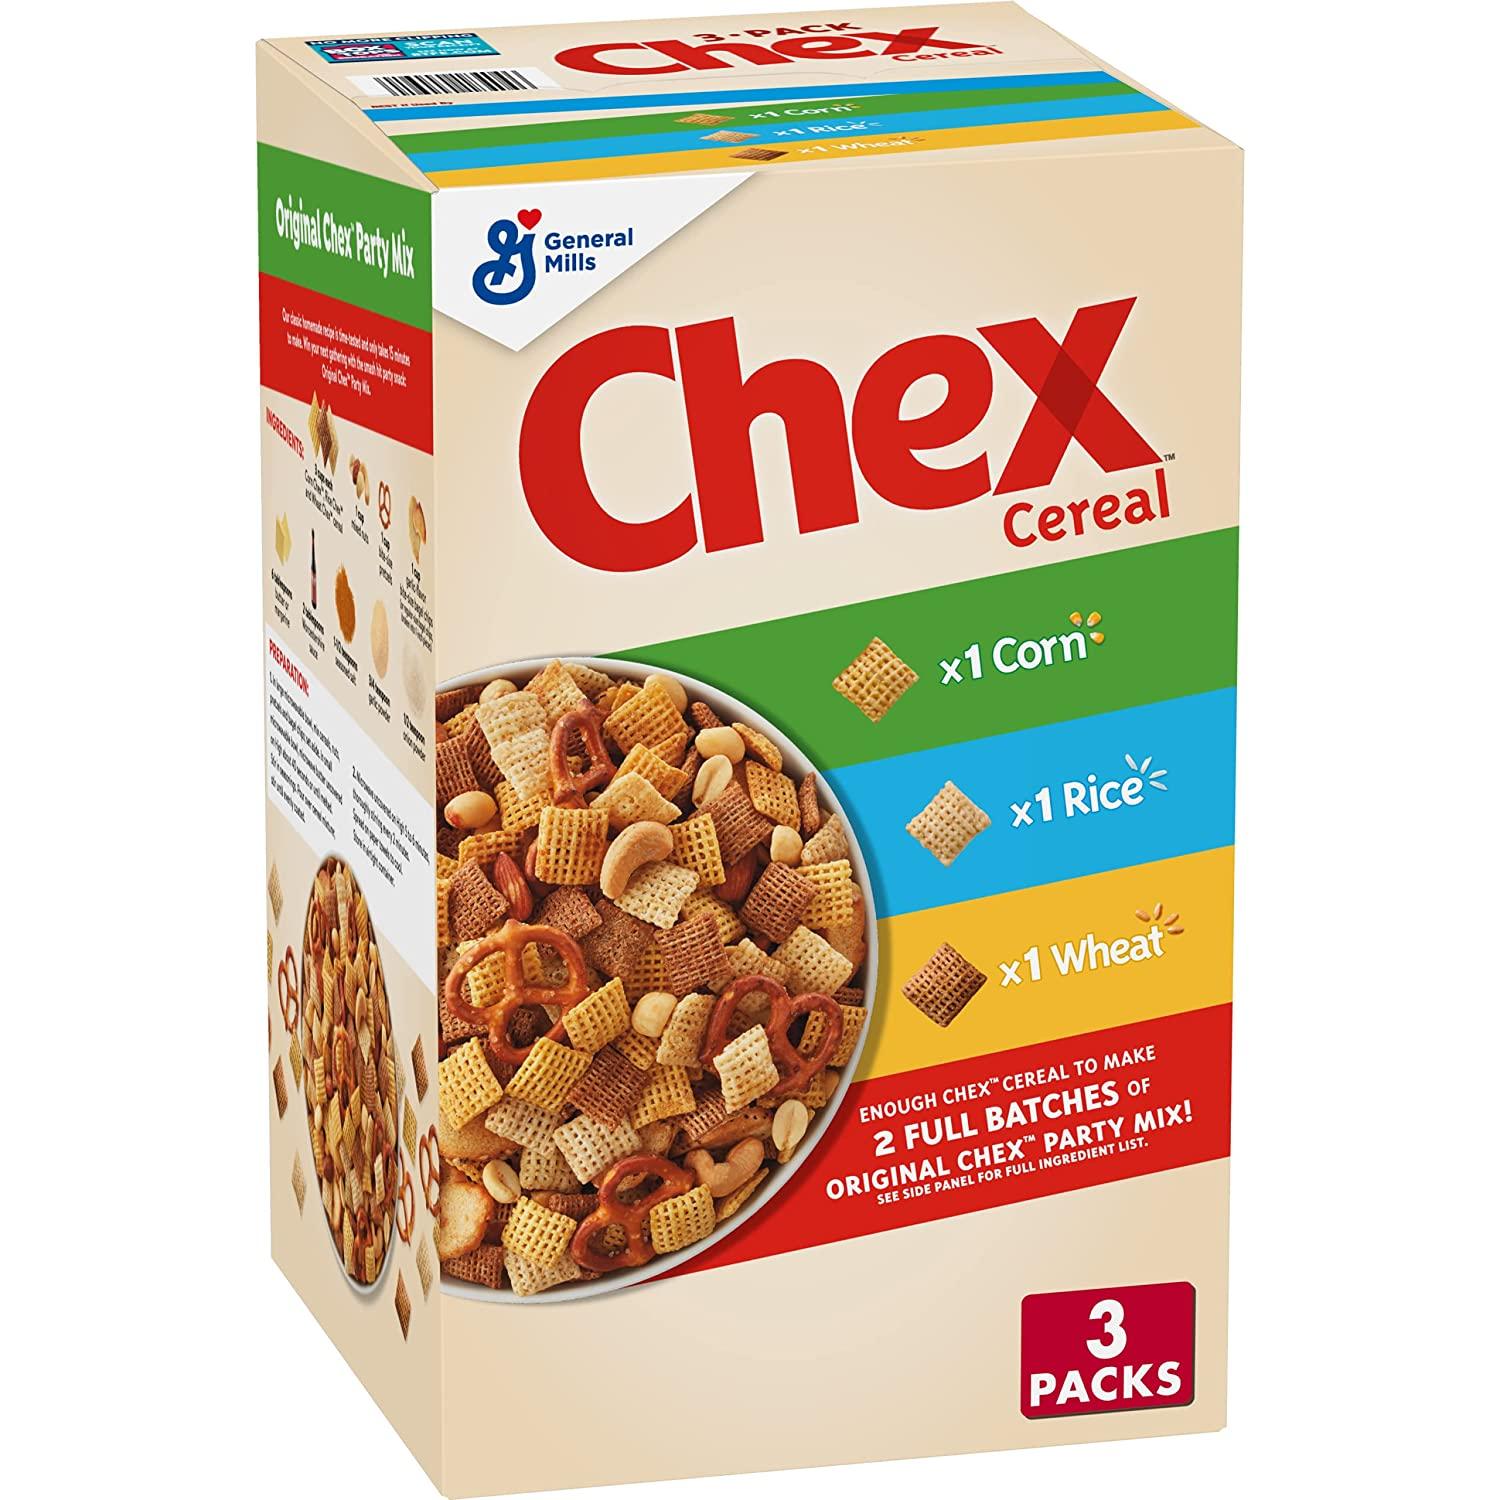 Chex Cereal Variety Pack for $5.18